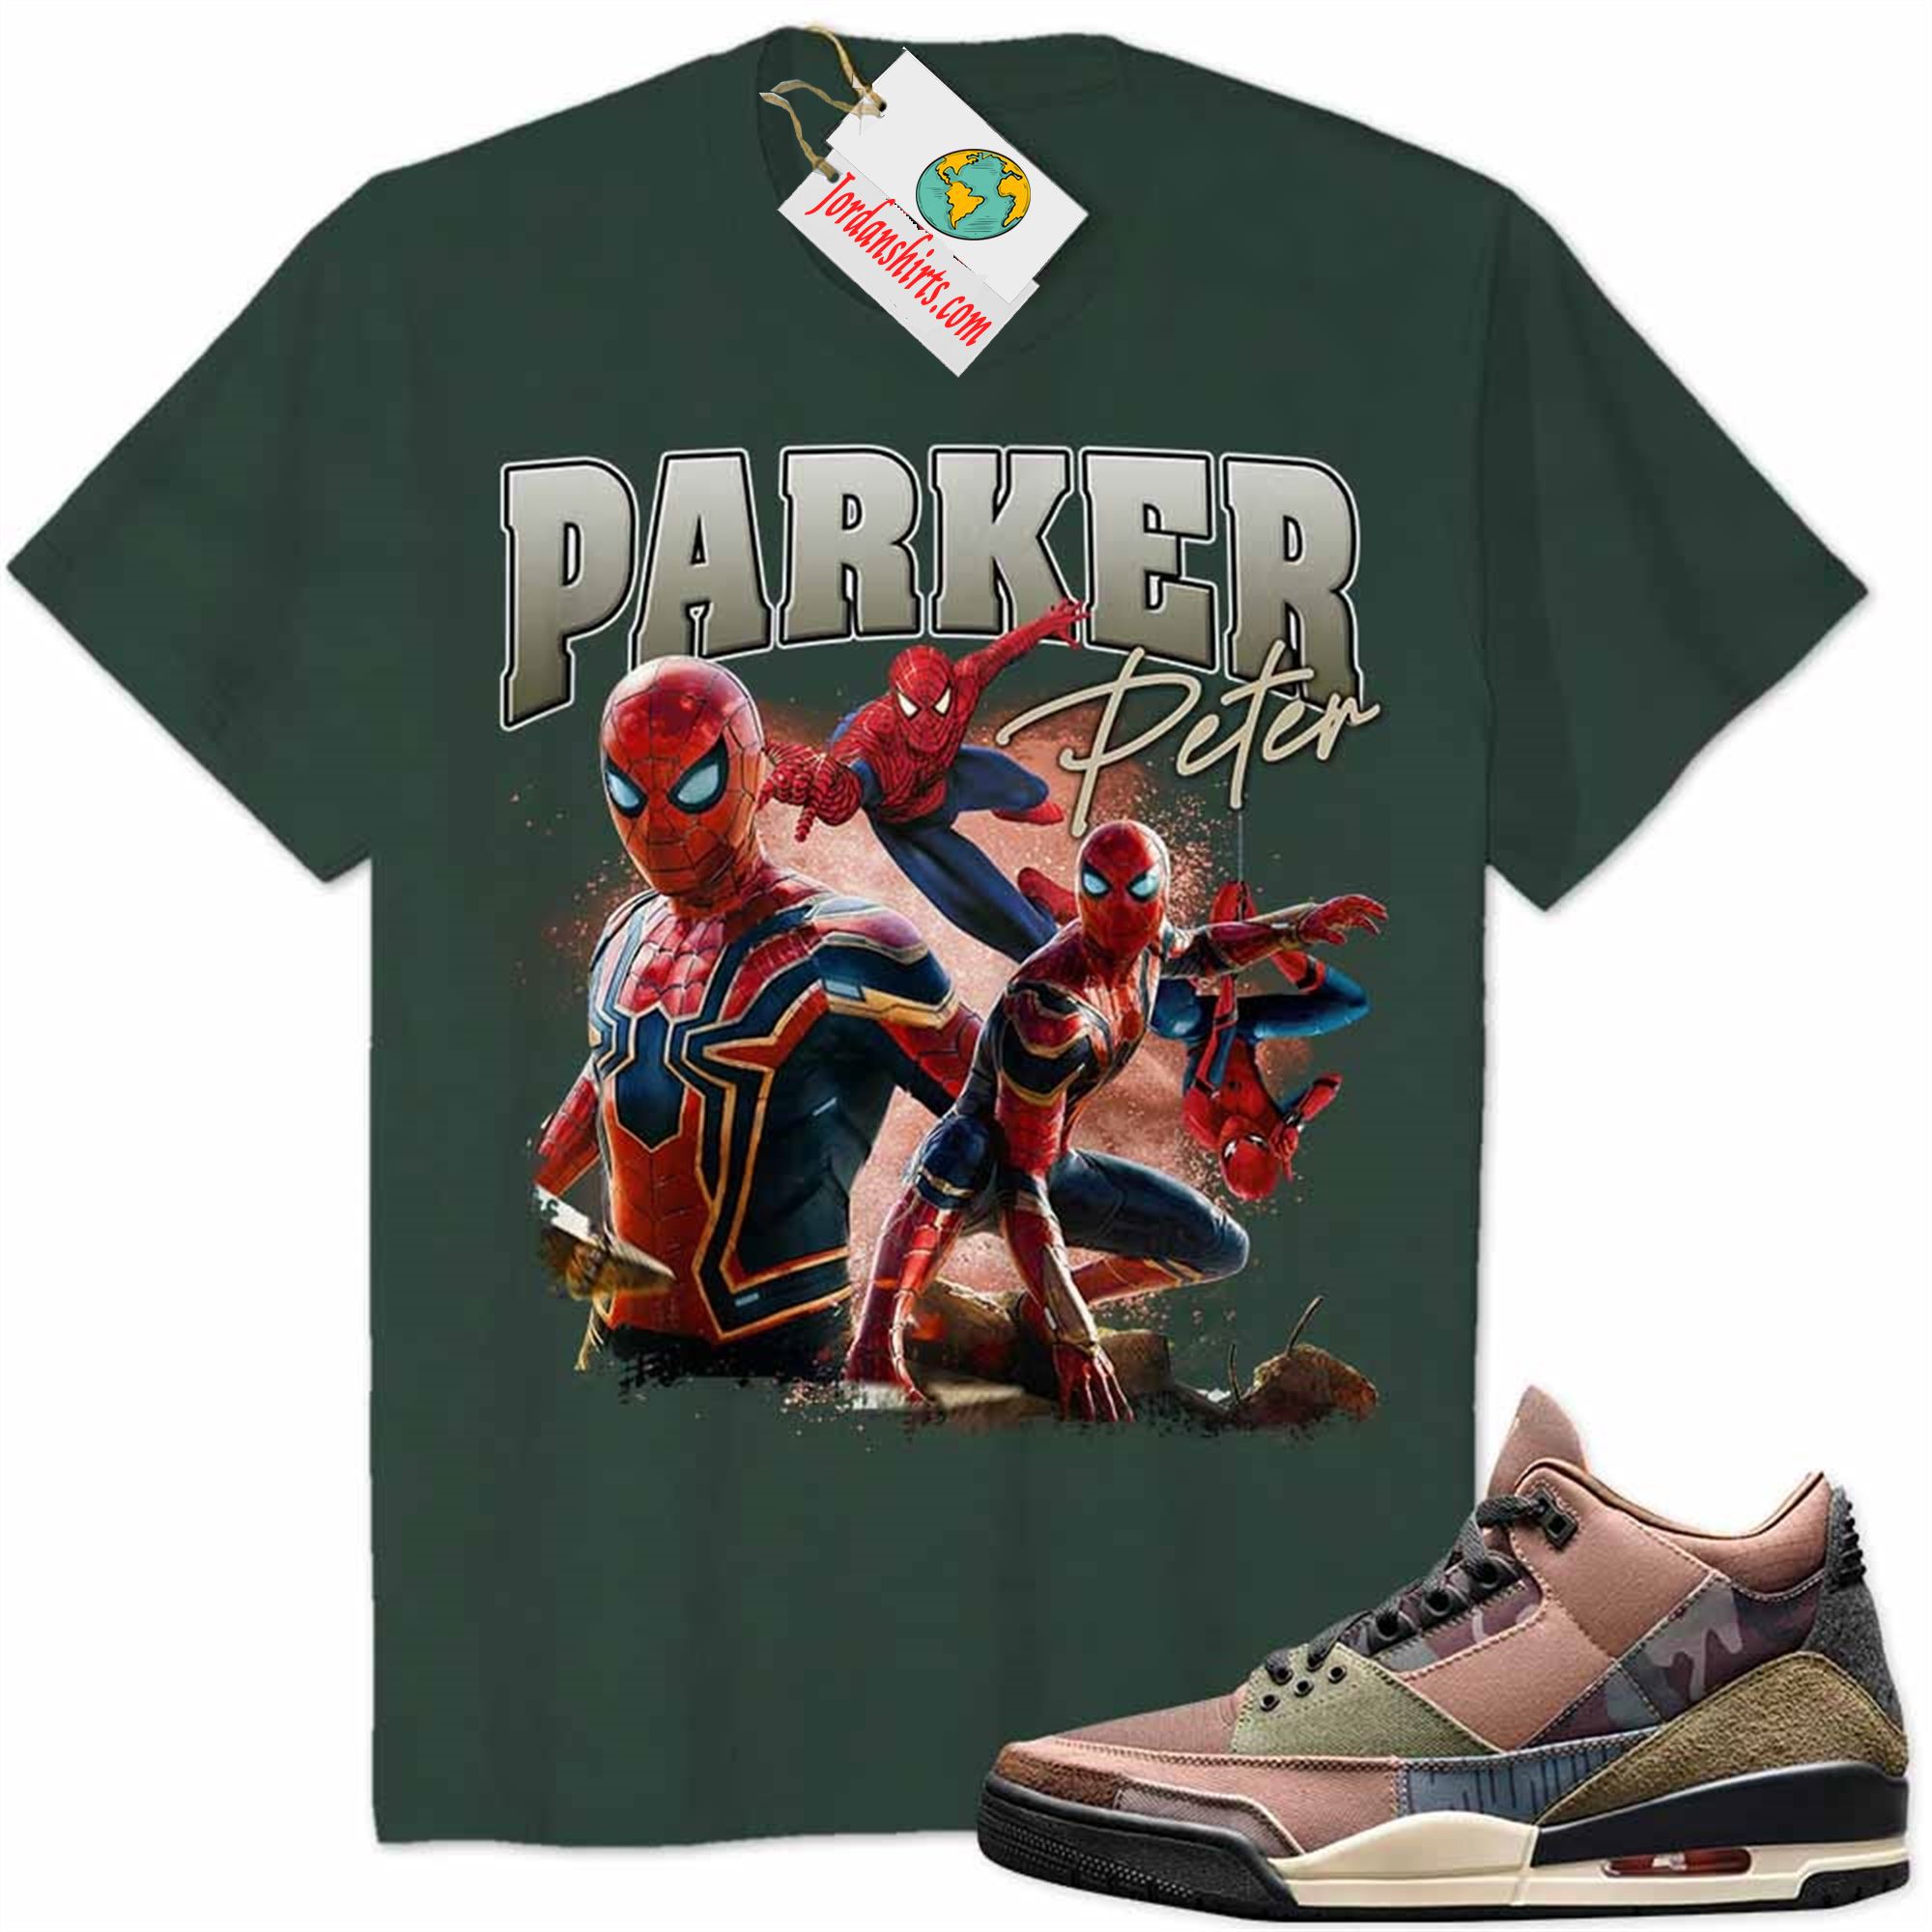 Jordan 3 Shirt, Peter Parker Tom Holland Spider-man No Way Home From Marvel Forest Air Jordan 3 Patchwork 3s Full Size Up To 5xl